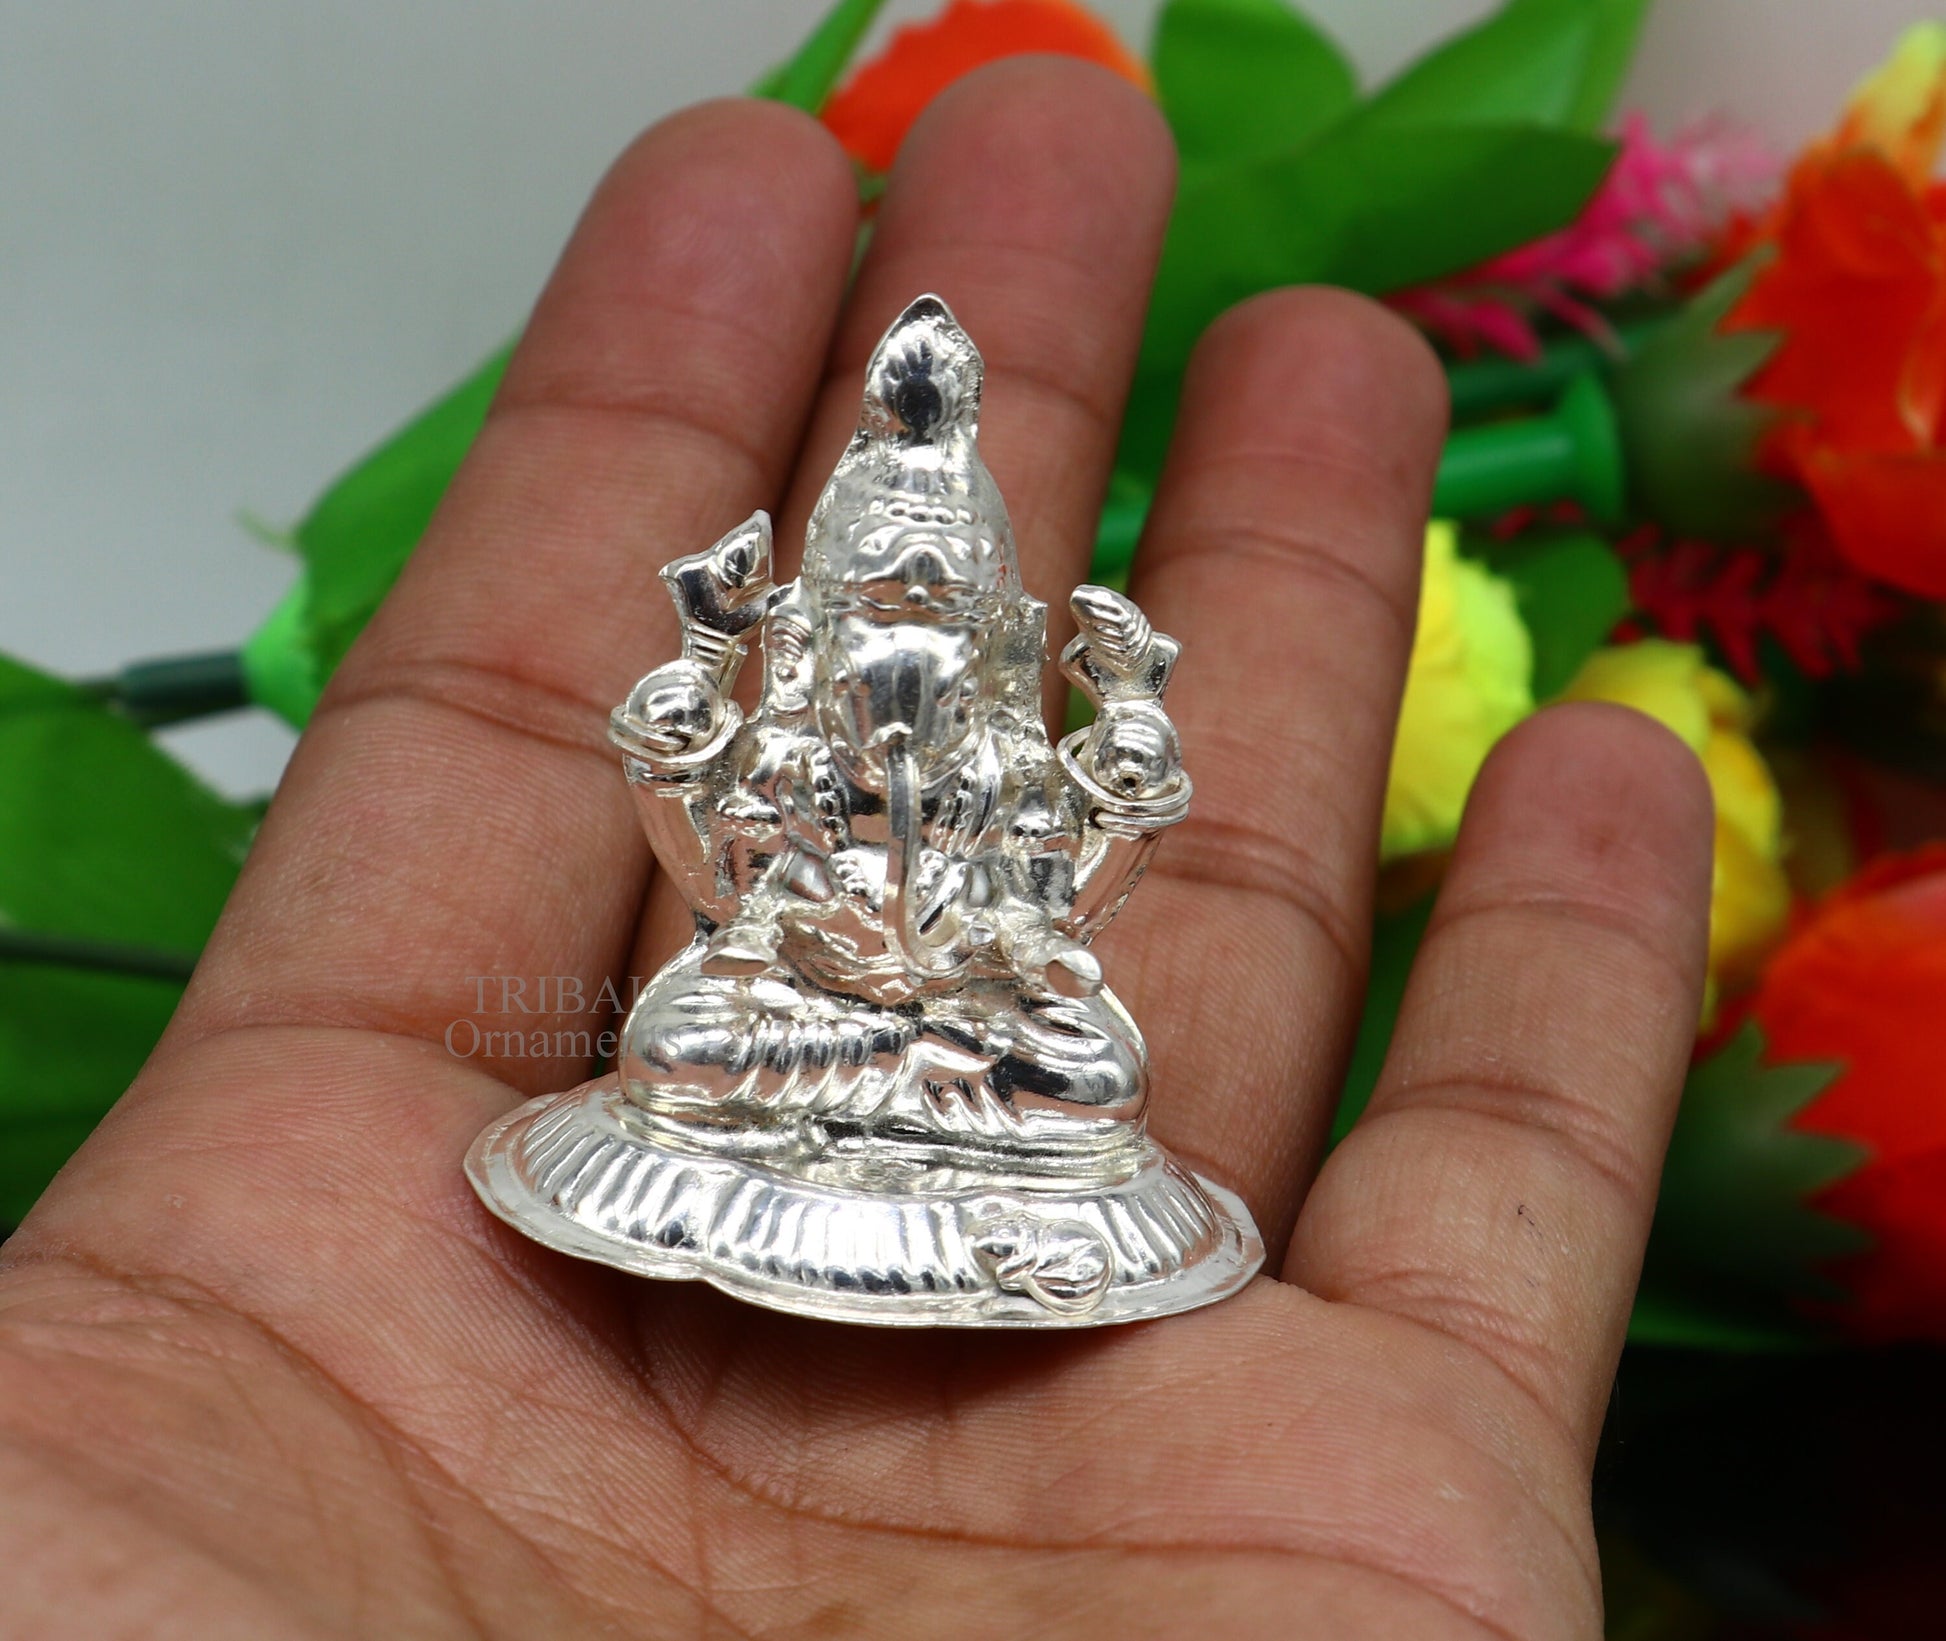 Lord Ganesha divine statue, fabulous Sterling silver ganesha statue figurine for home temple diwali puja article utensils art493 - TRIBAL ORNAMENTS